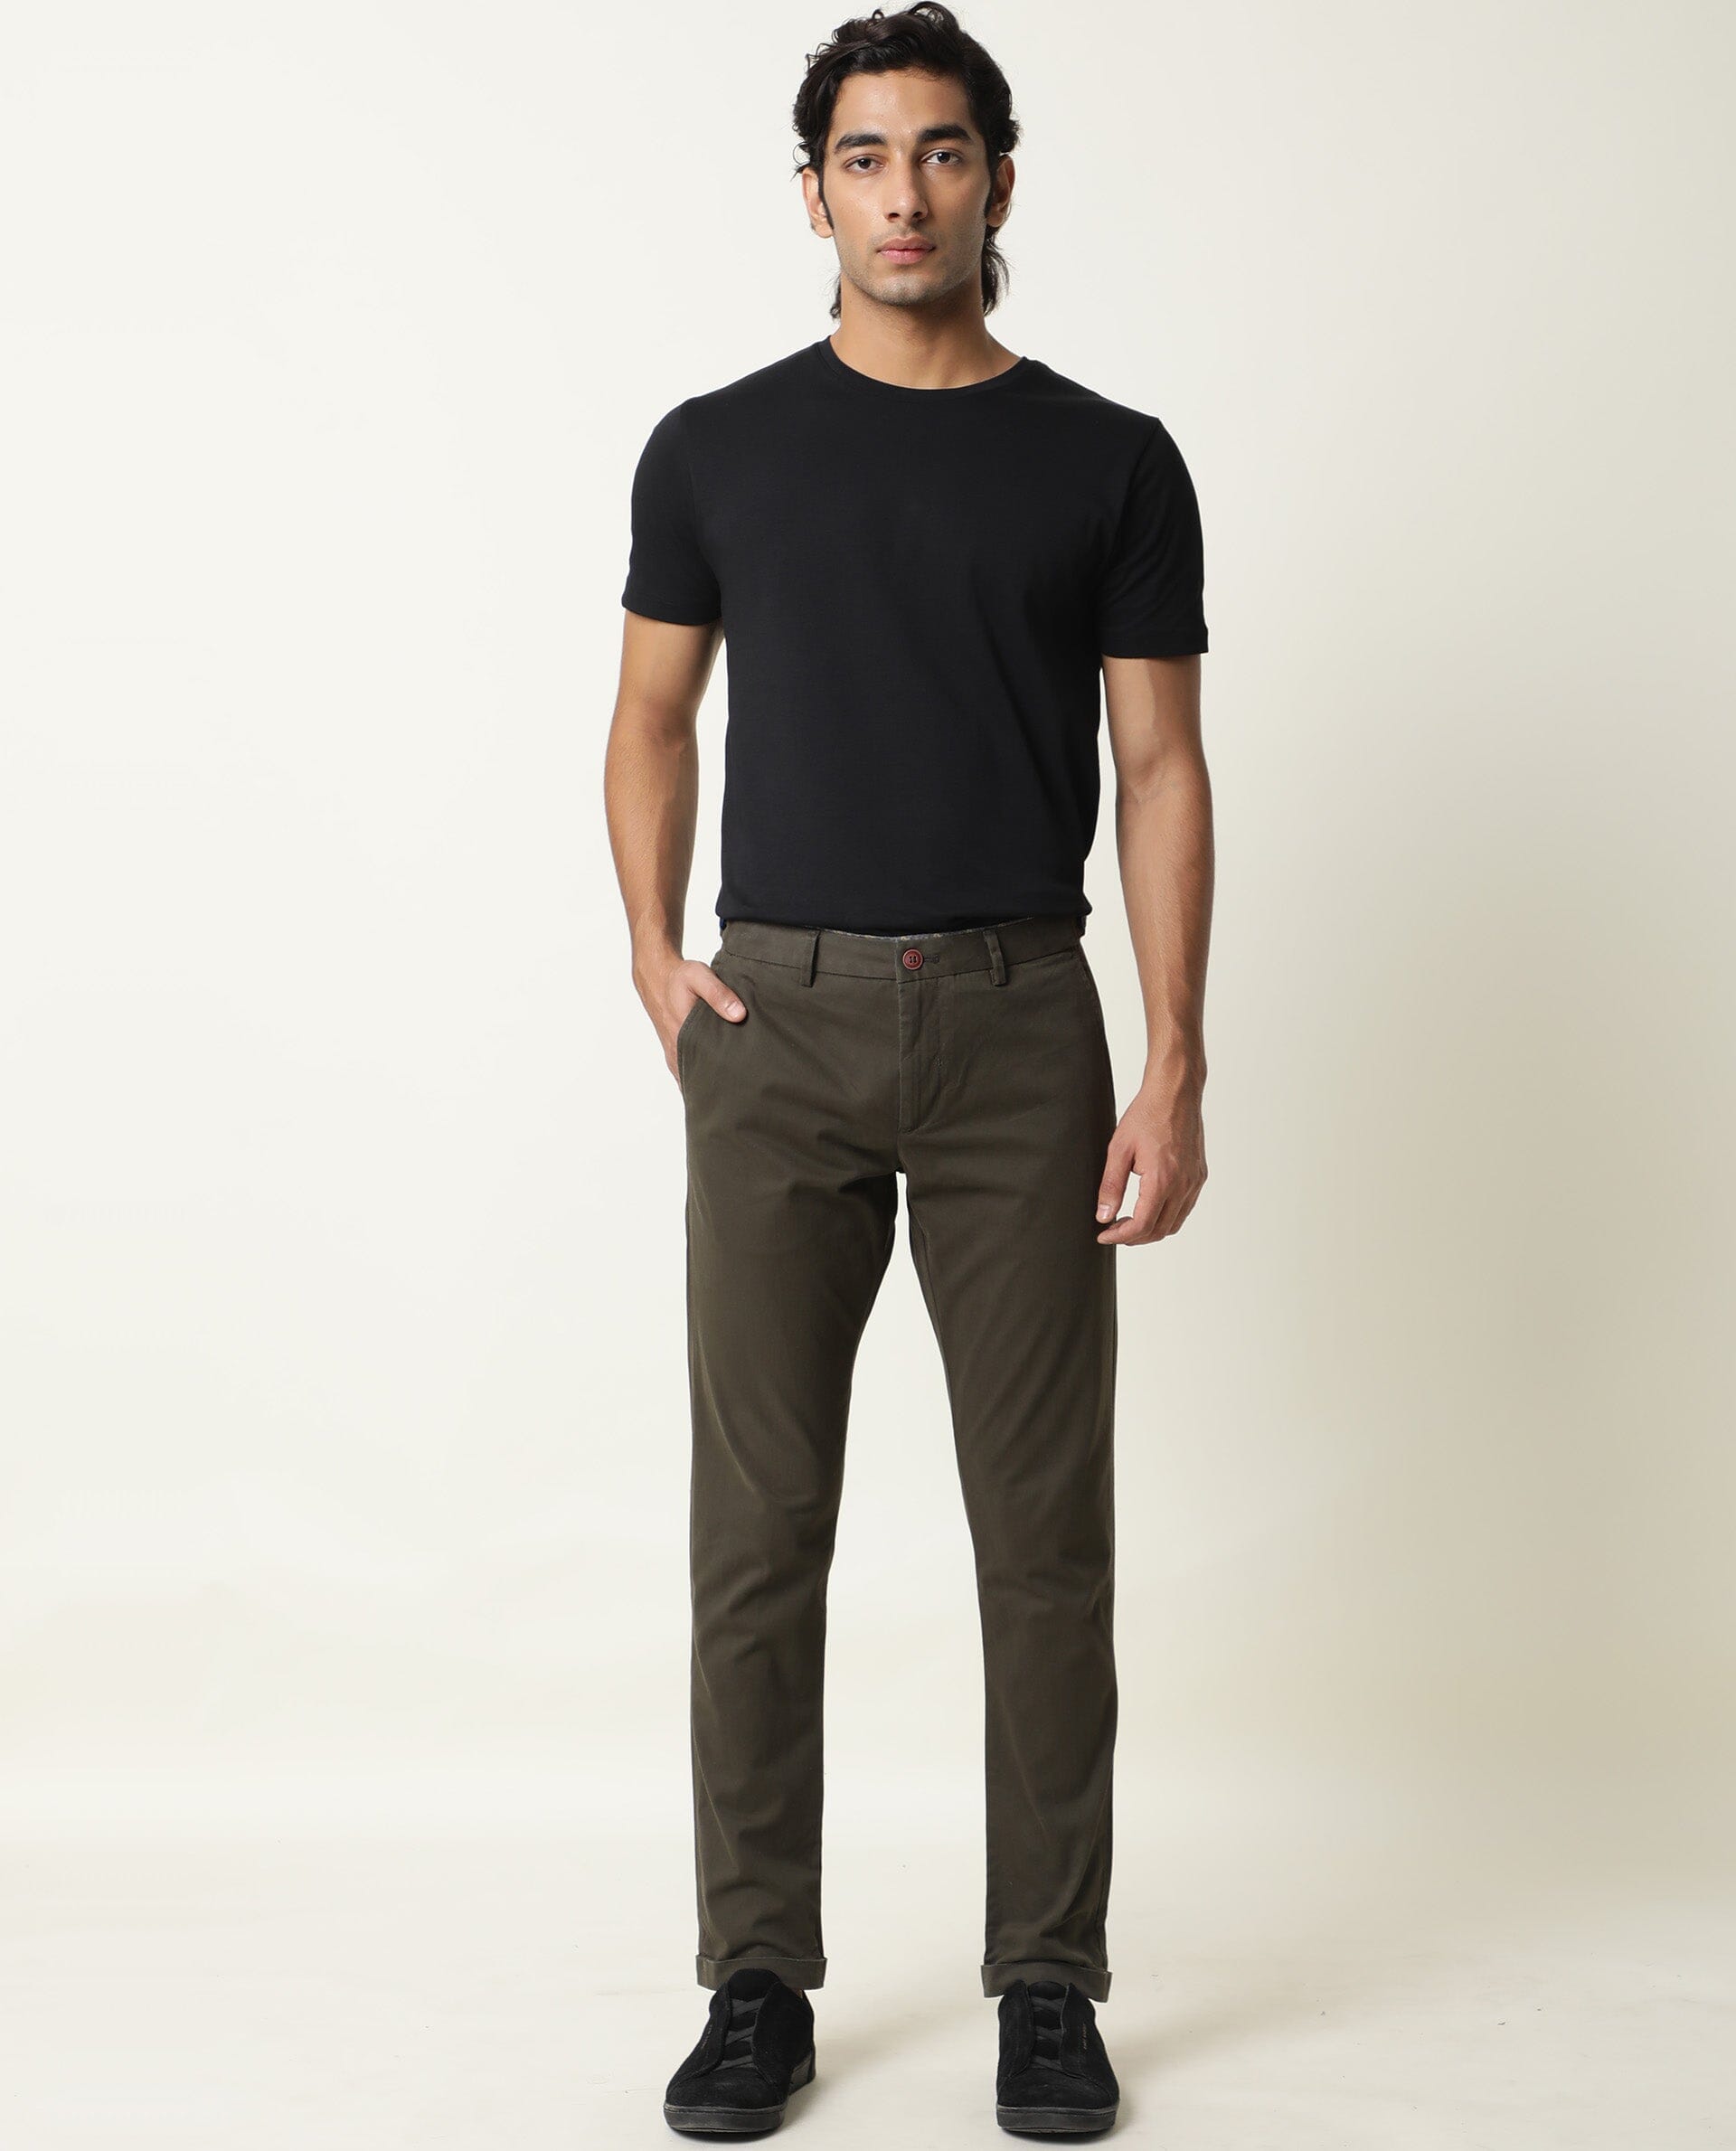 Buy Men Olive Slim Fit Solid Casual Trousers Online  668197  Allen Solly